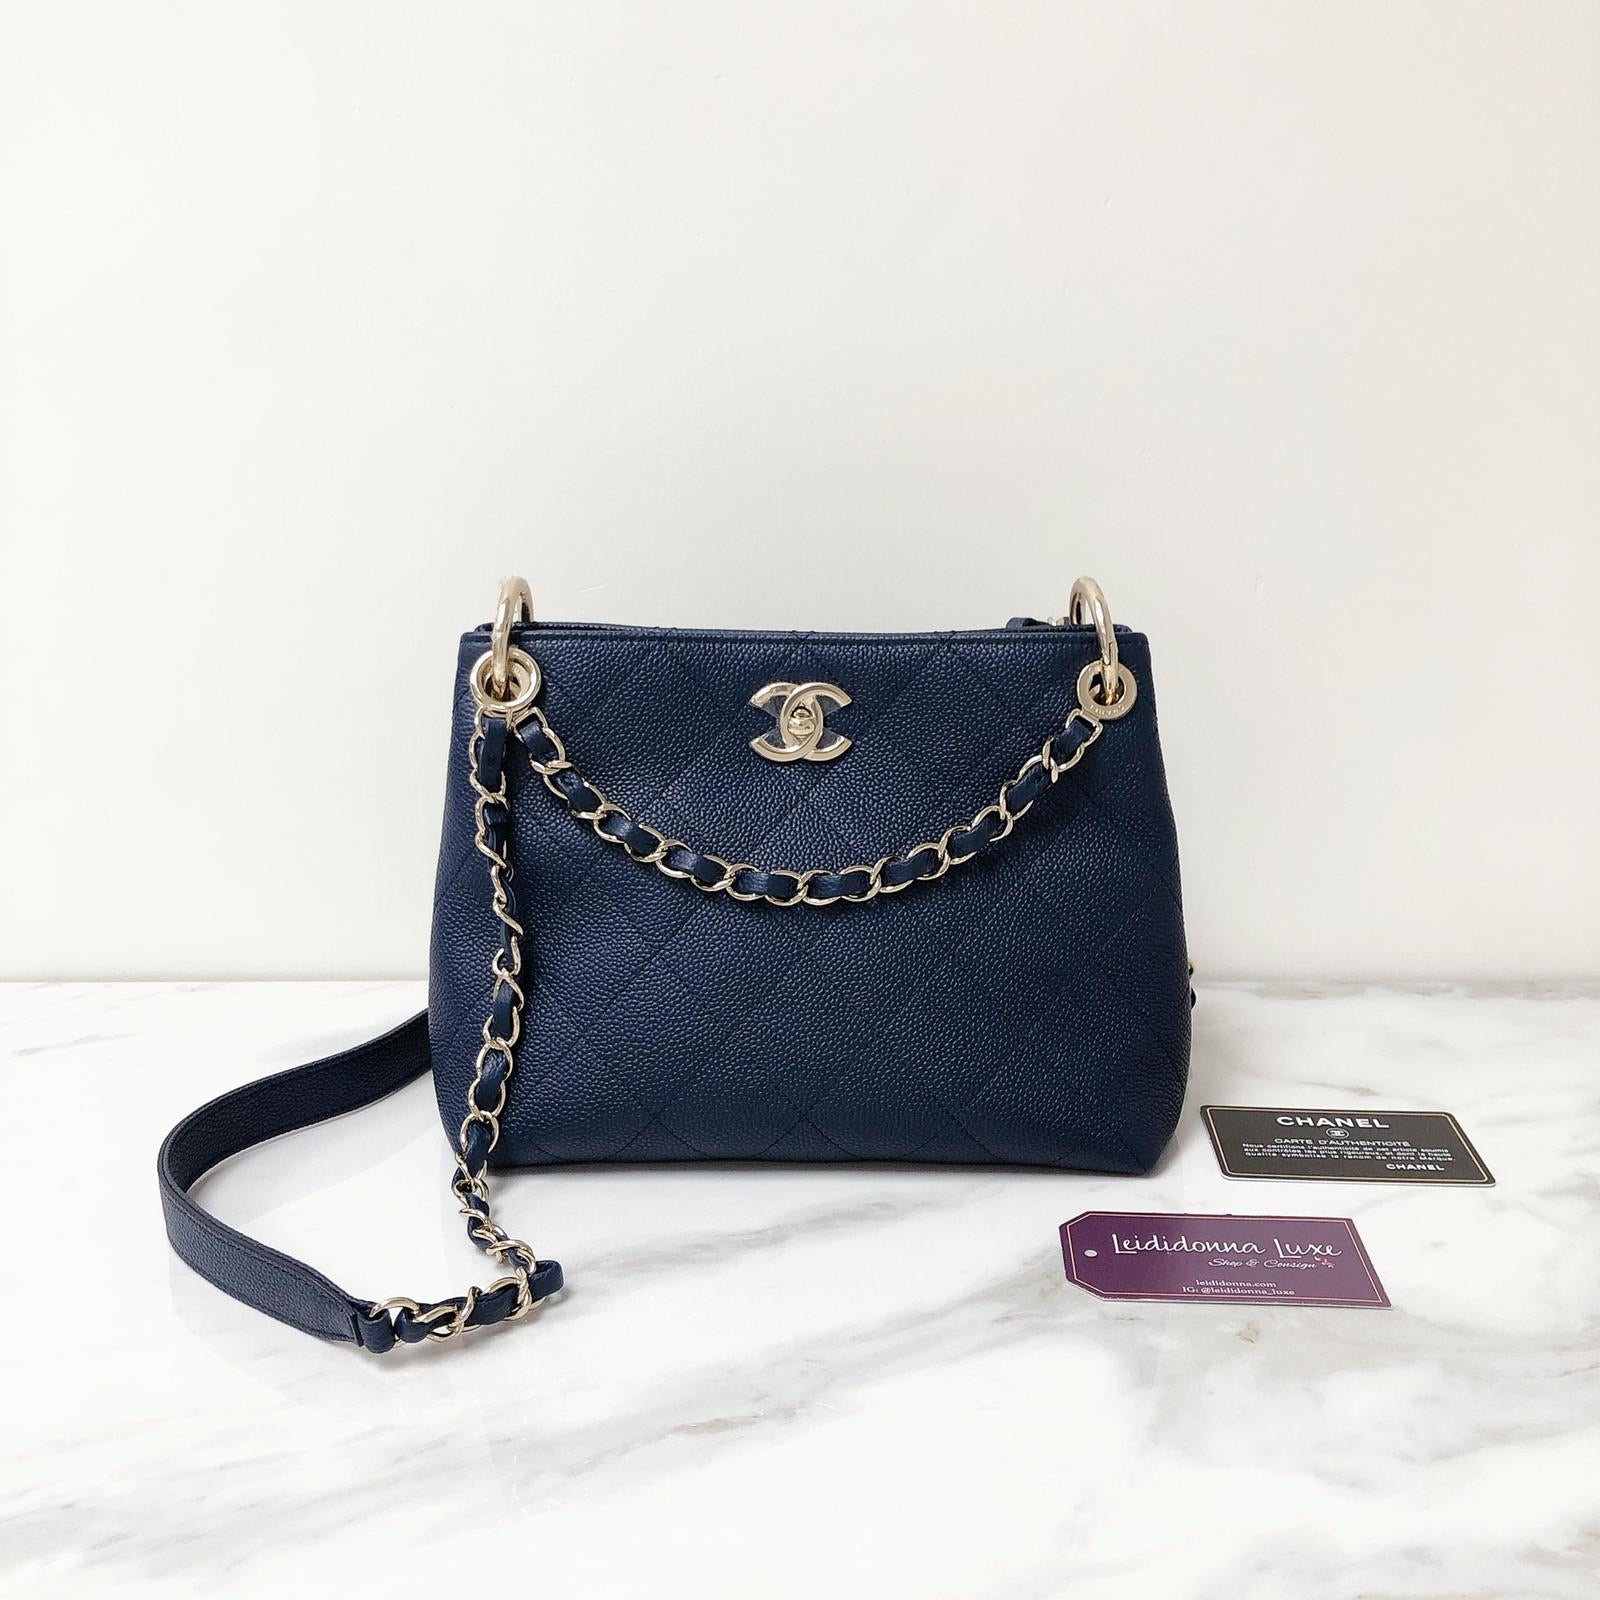 CHANEL Two Way Crossbody Tote